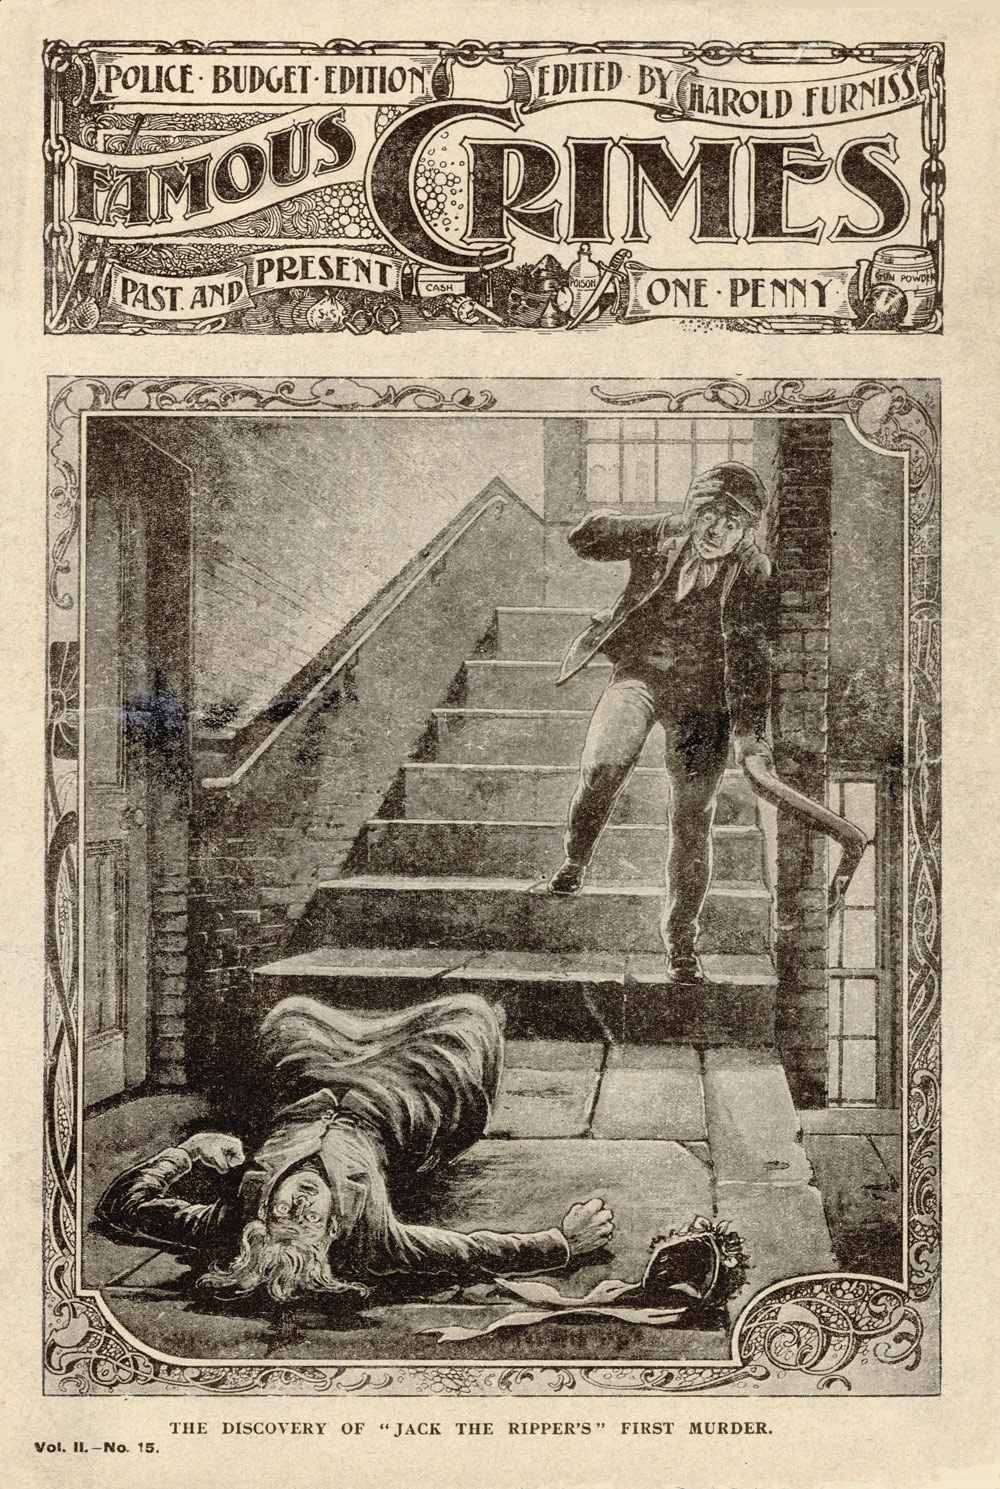 PHOTO: Famous Crimes, Past and Present - The Discovery of Jack the Ripper's first murder. Photo courtesy of Wikimedia Commons.